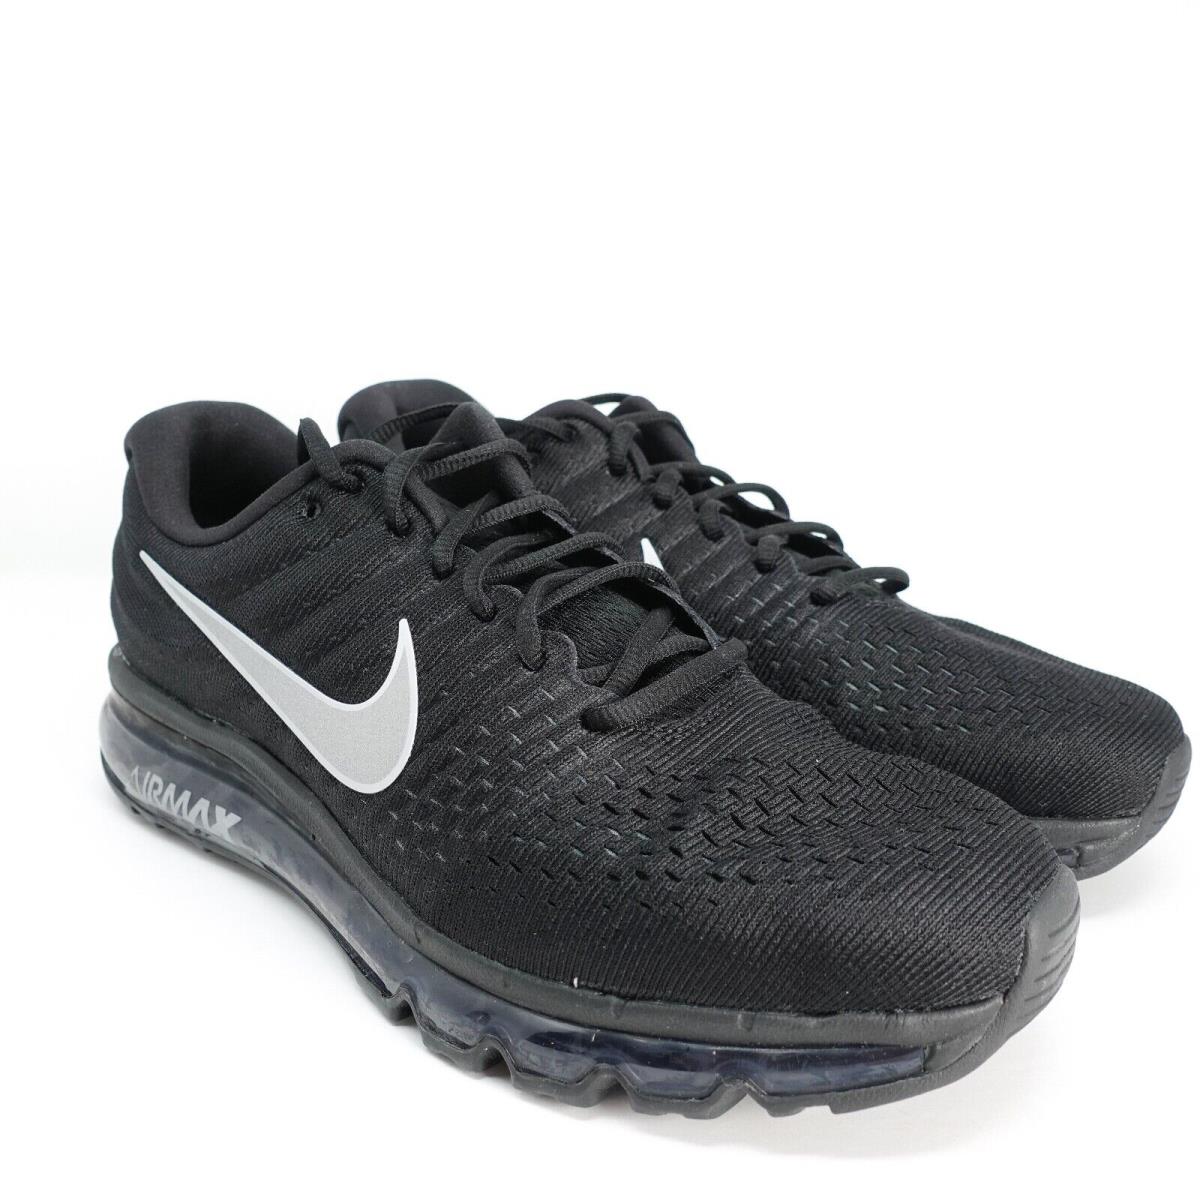 Lender essence tricky Nike Air Max 2017 Black White Anthracite Running Shoes 849559-001 Mens Size  7 | 666032895764 - Nike shoes Air Max - Black | SporTipTop